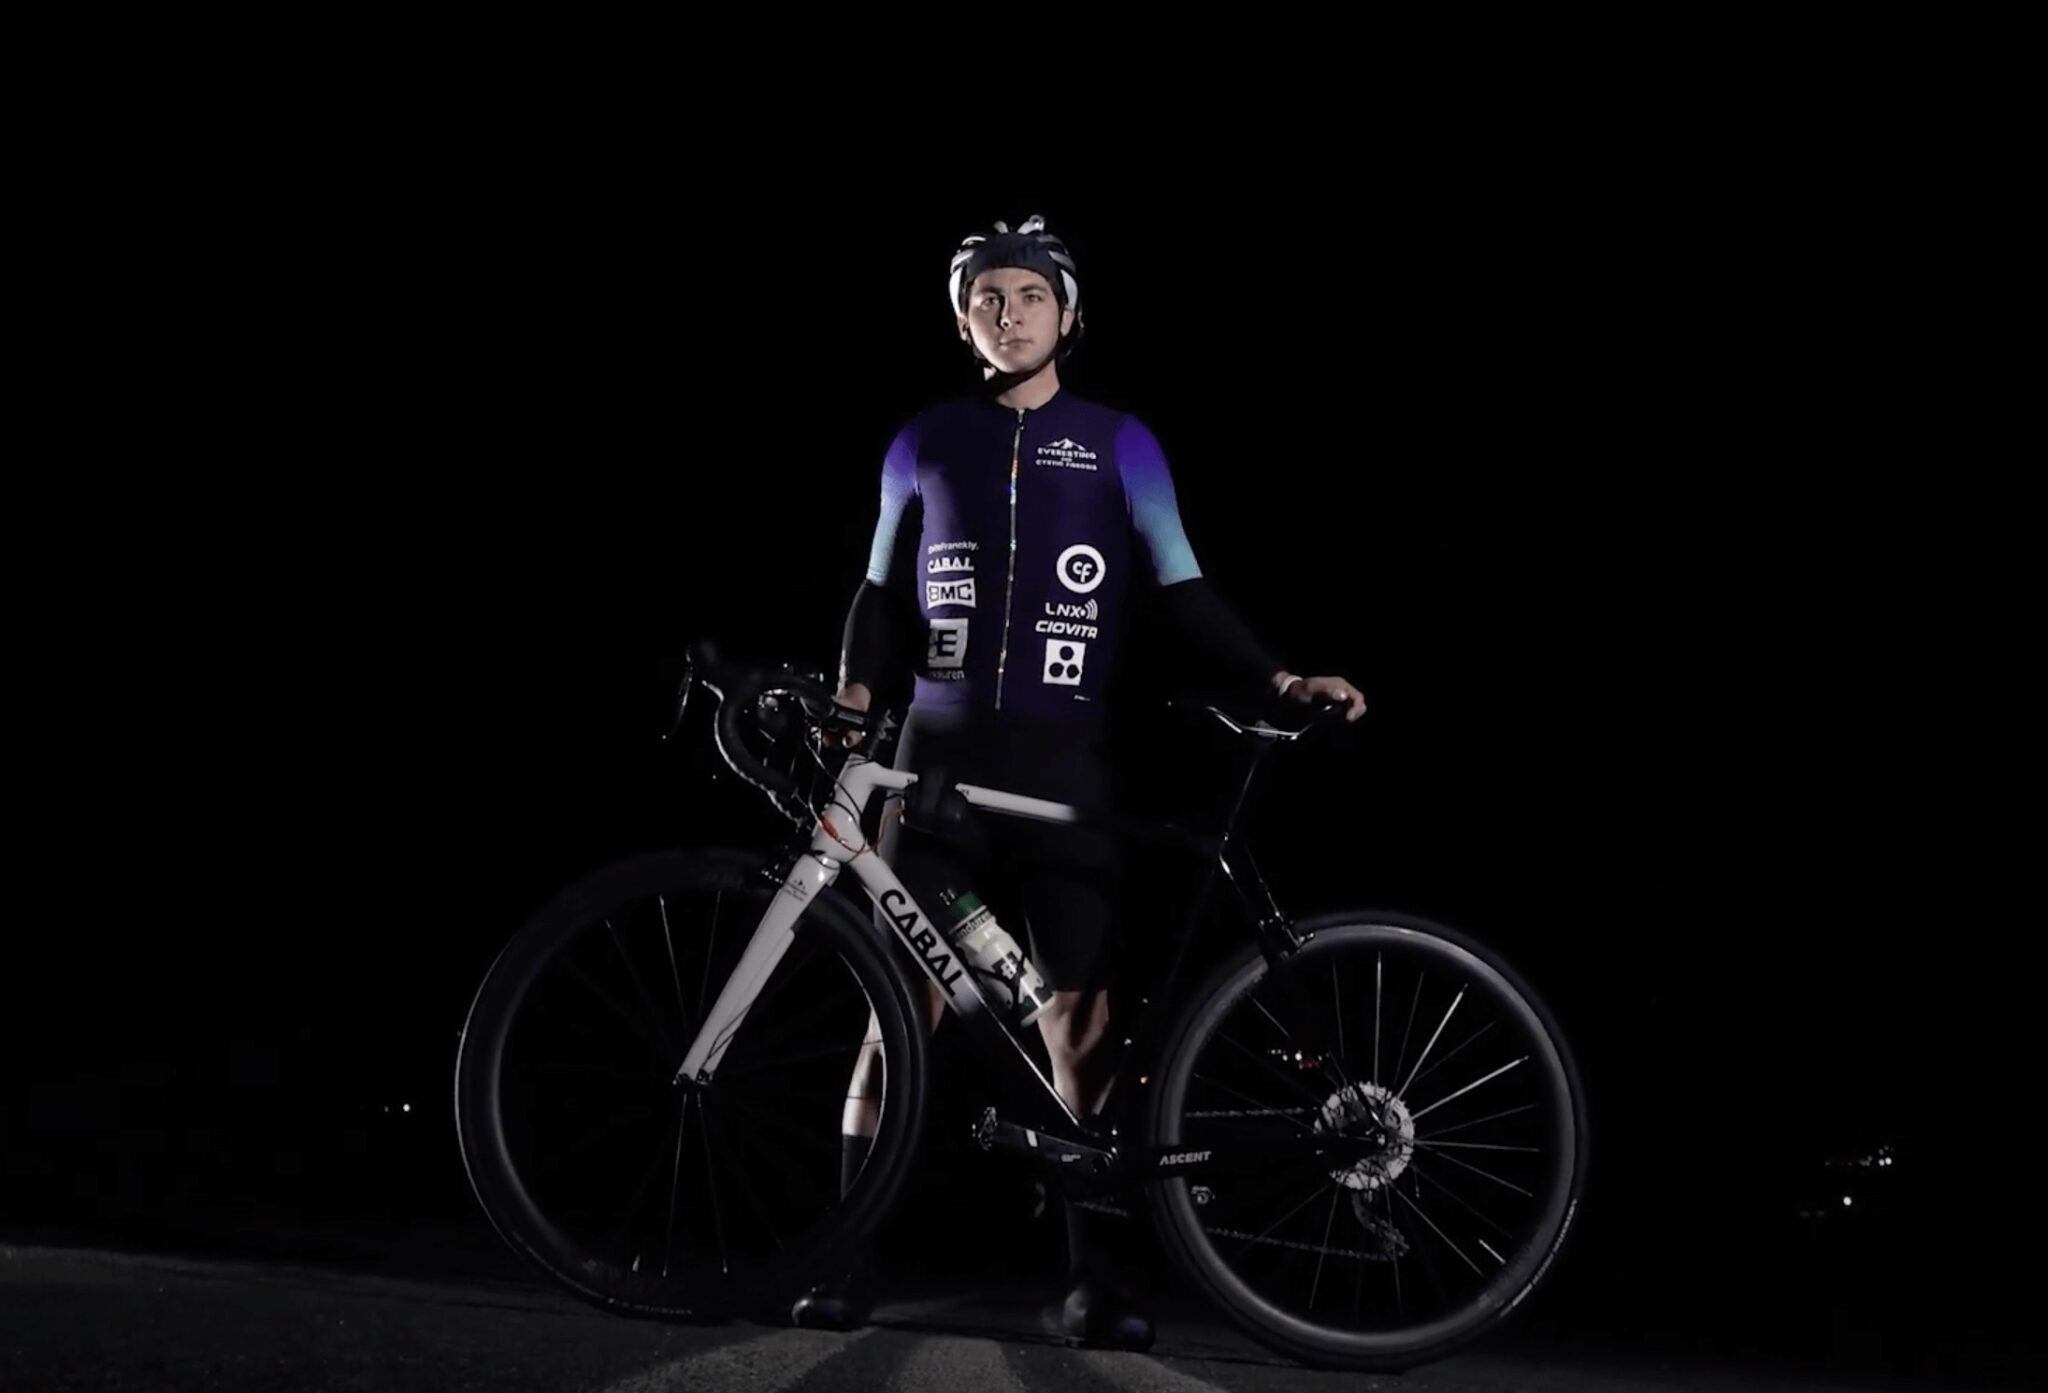 The Ride For His Life – Cyclist With Cystic Fibrosis Cycles For Access To Life Saving Medication